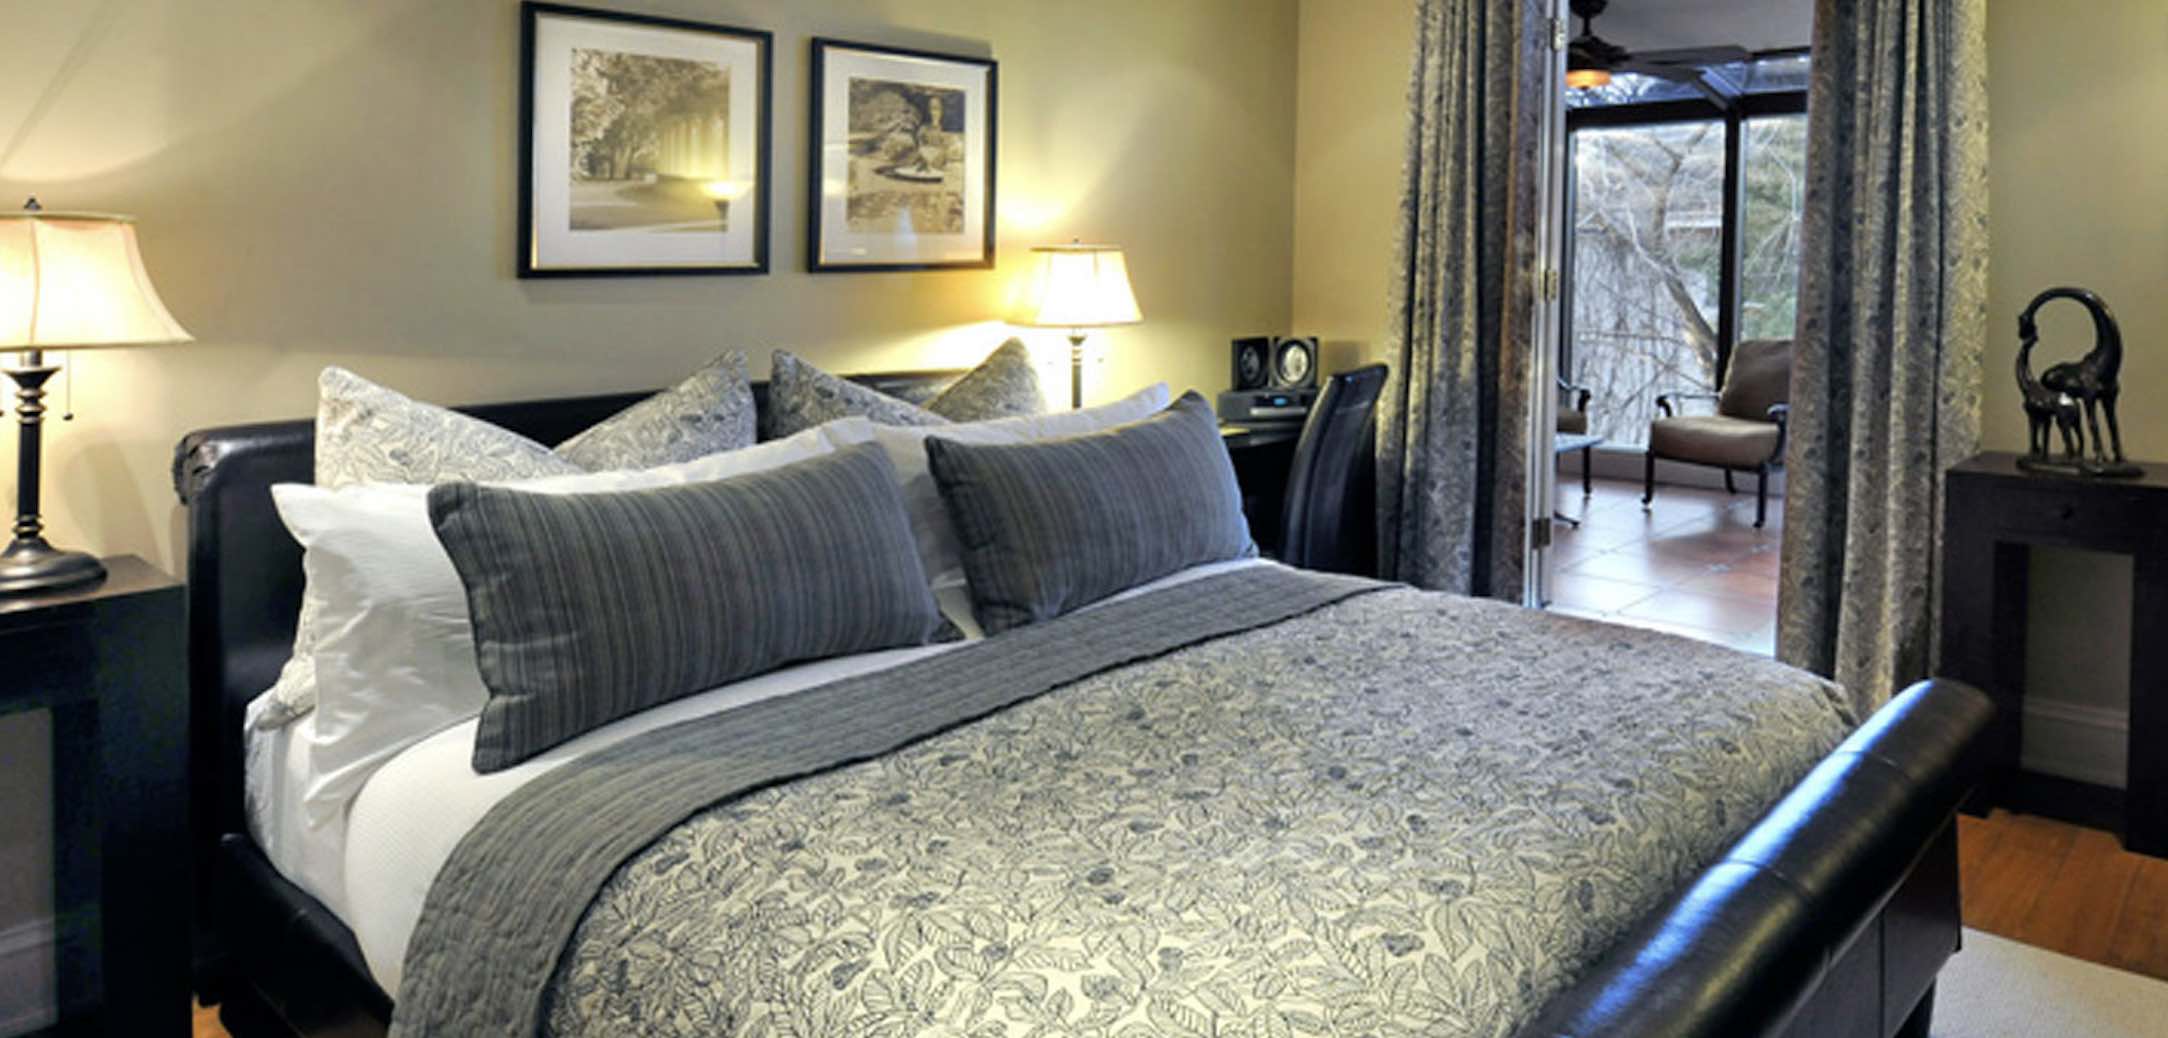 Oban Inn luxury hotels in niagara-on-the-lake bedroom with living area